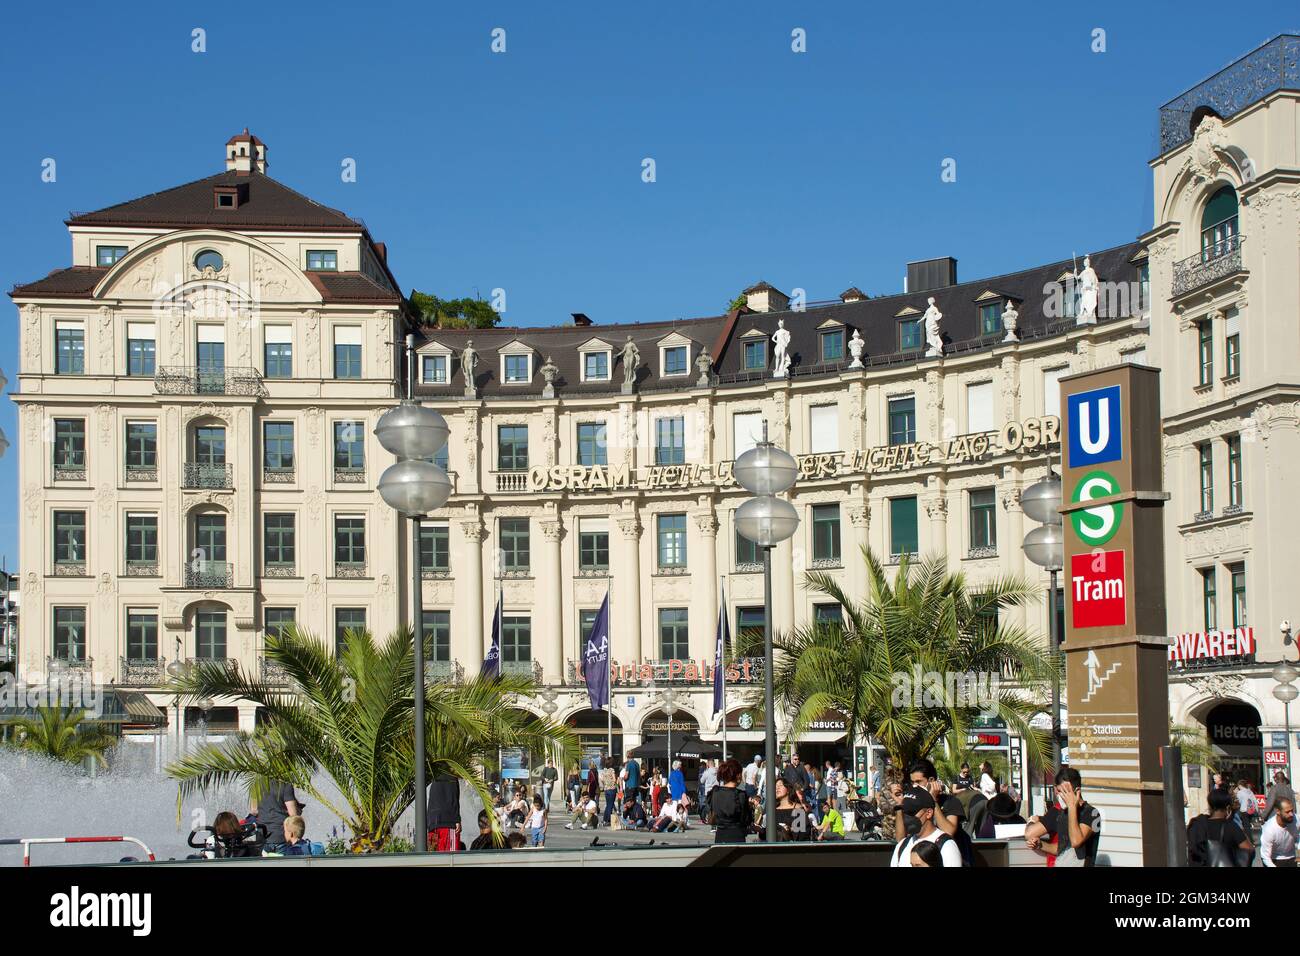 Karlstor square in the old town of Munich with people in the pedestrian zone- Germany. Stock Photo